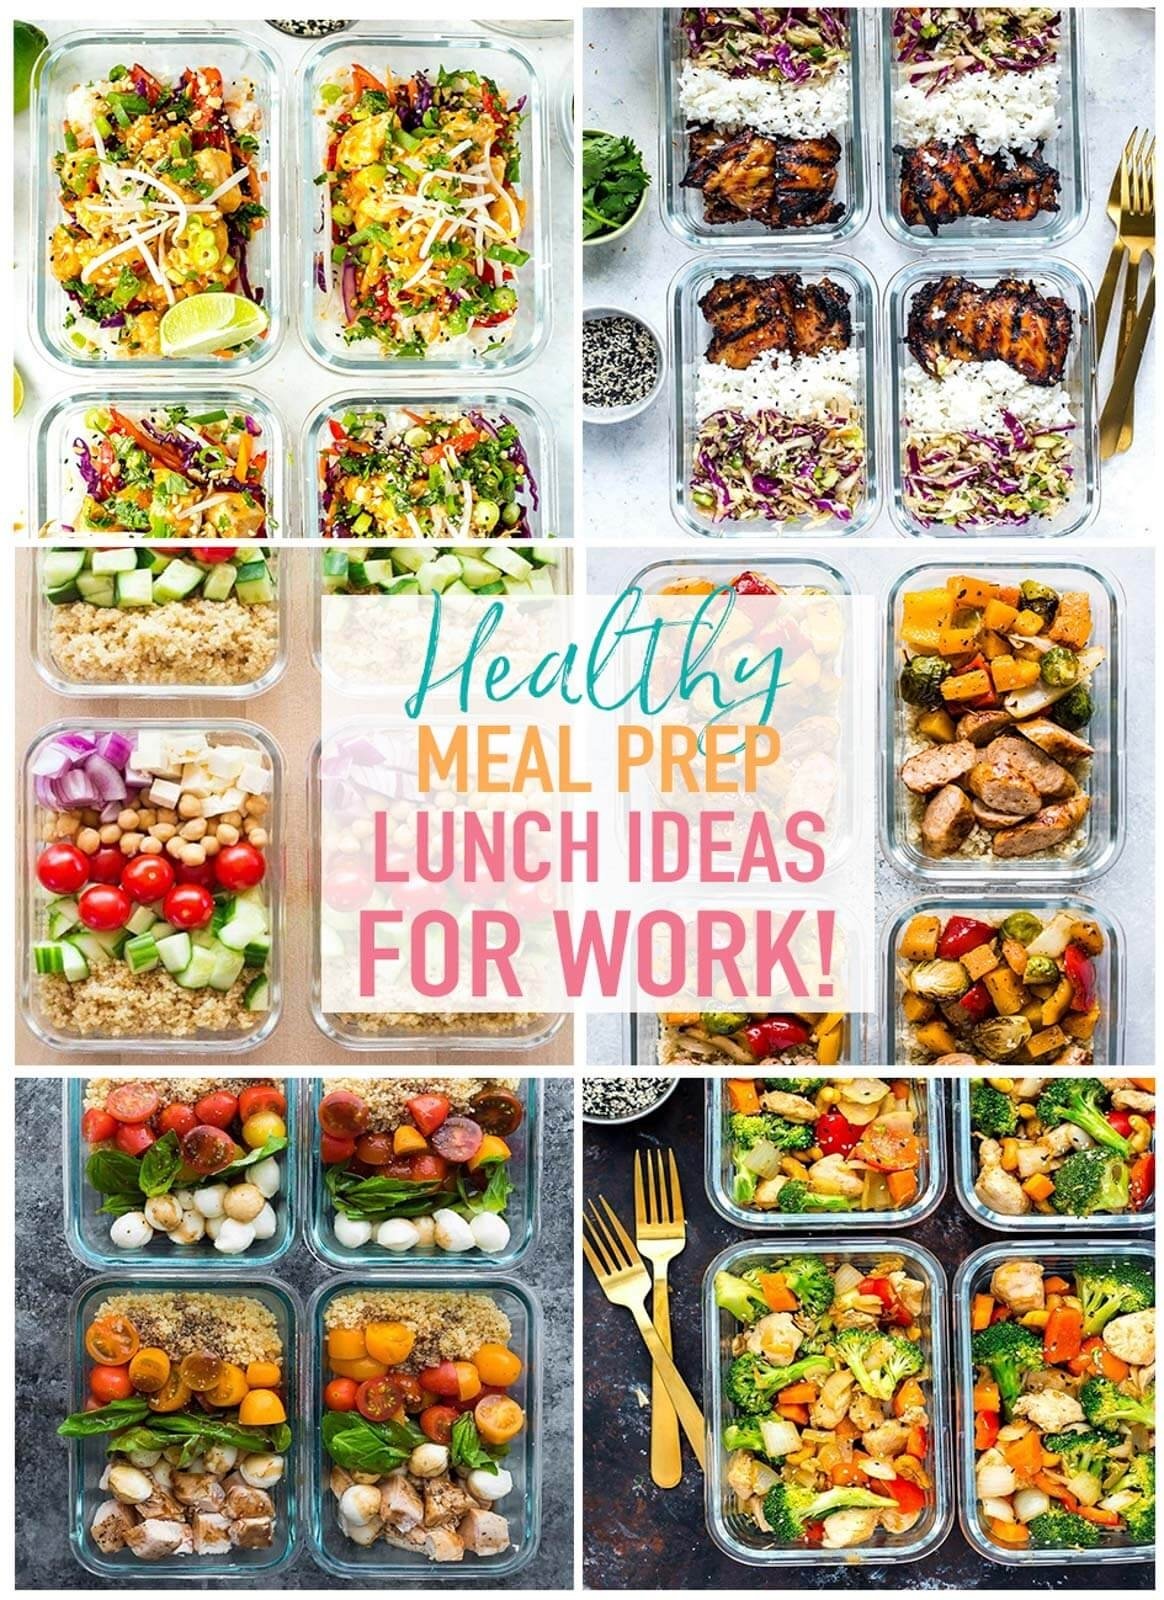 Easy Healthy Lunch Meals - Aria Art